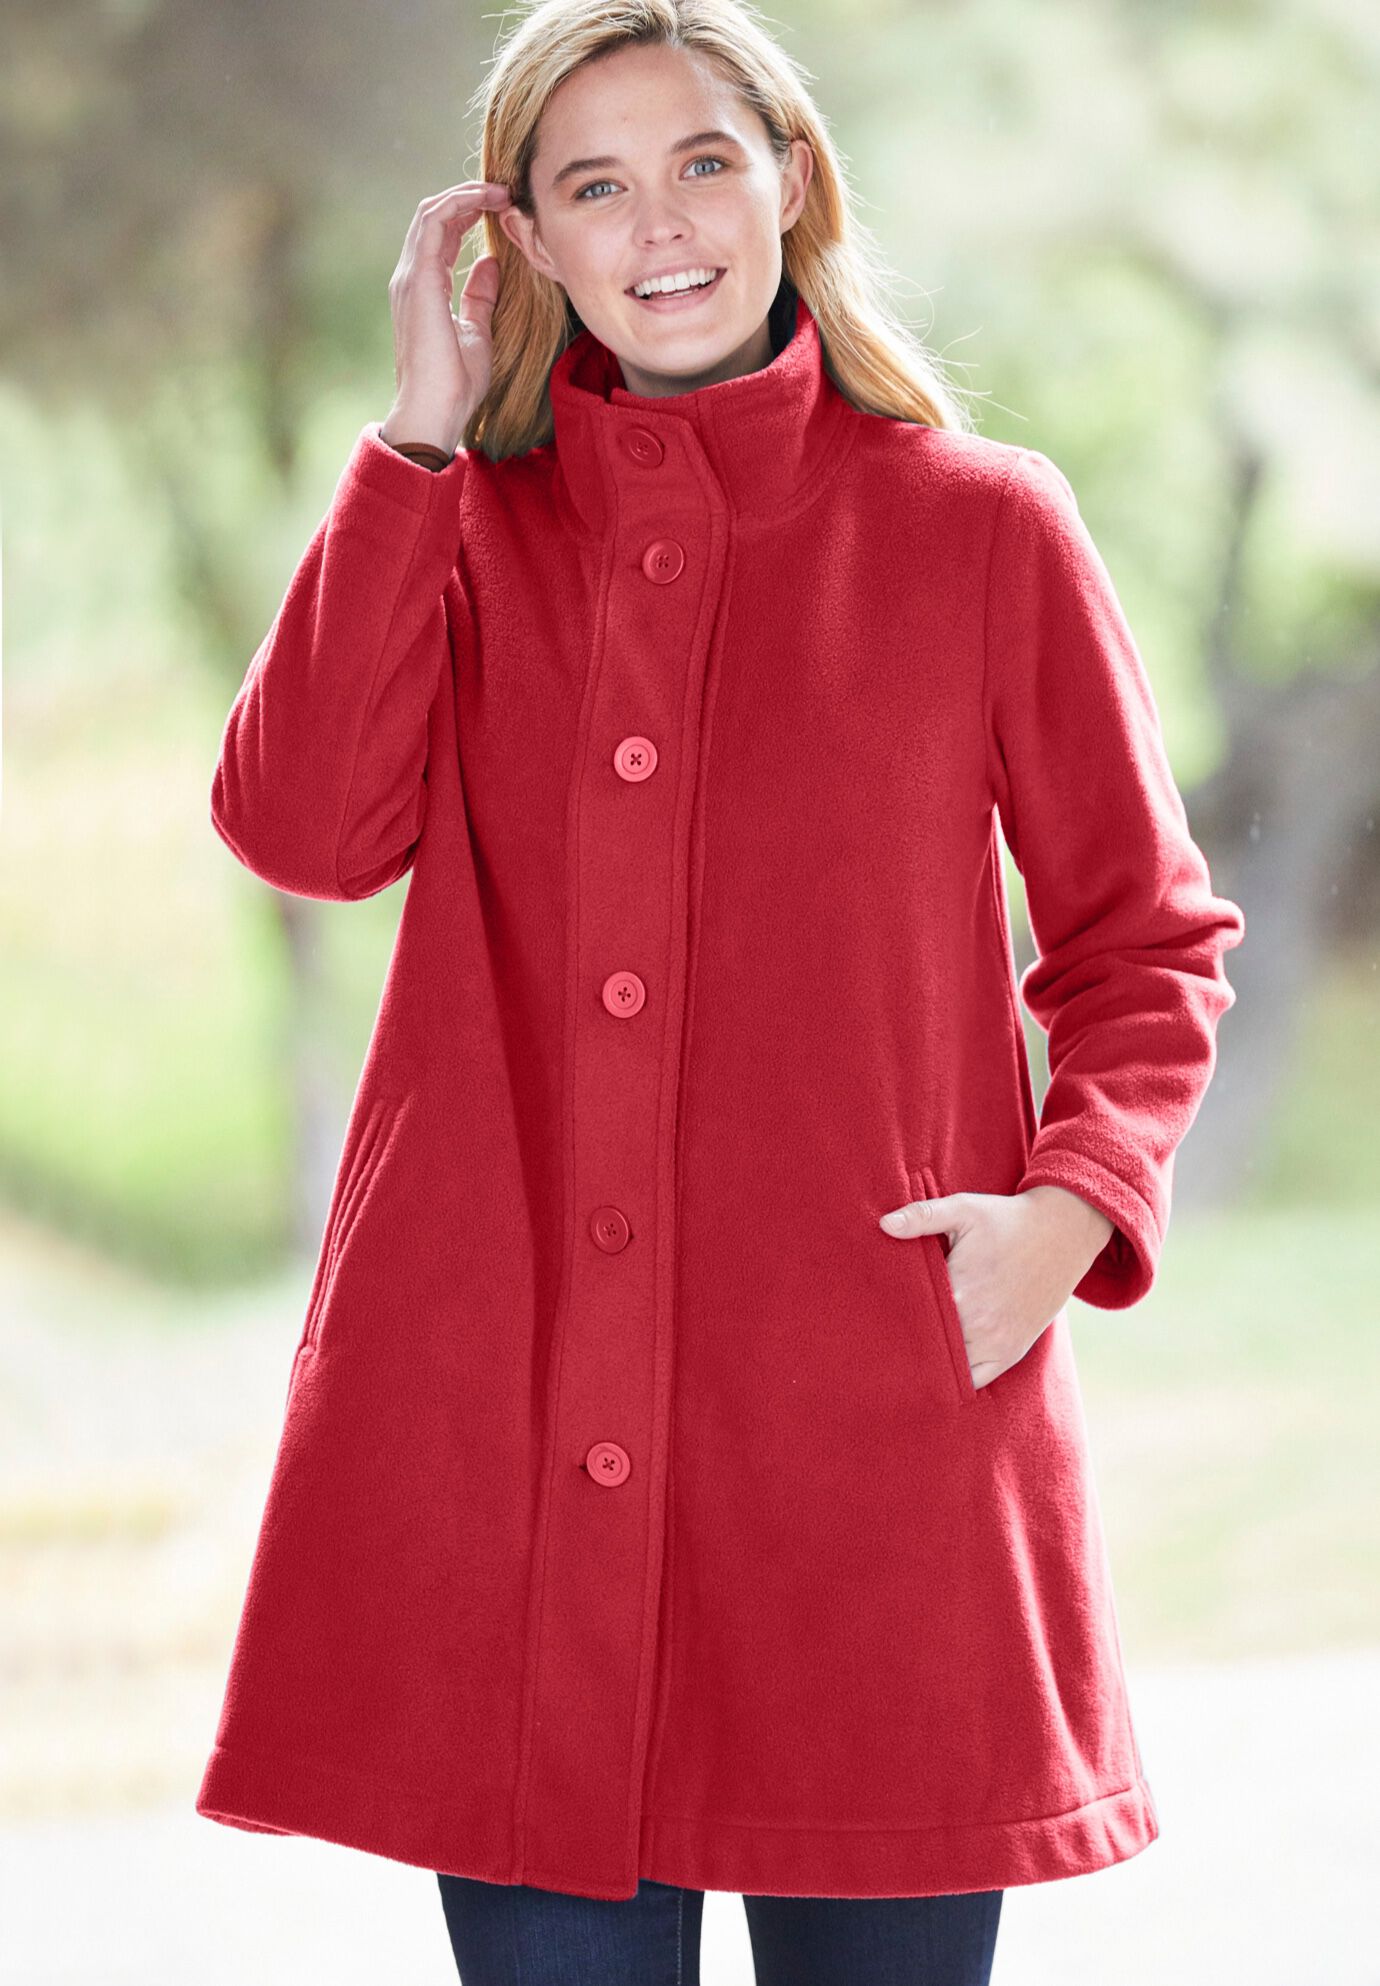 X-Small, red Large Collar and Elegant Suede Tied Buttons Janska Tie Button Jacket Women’s Warm Fleece A-Line Swing Coat with Pockets